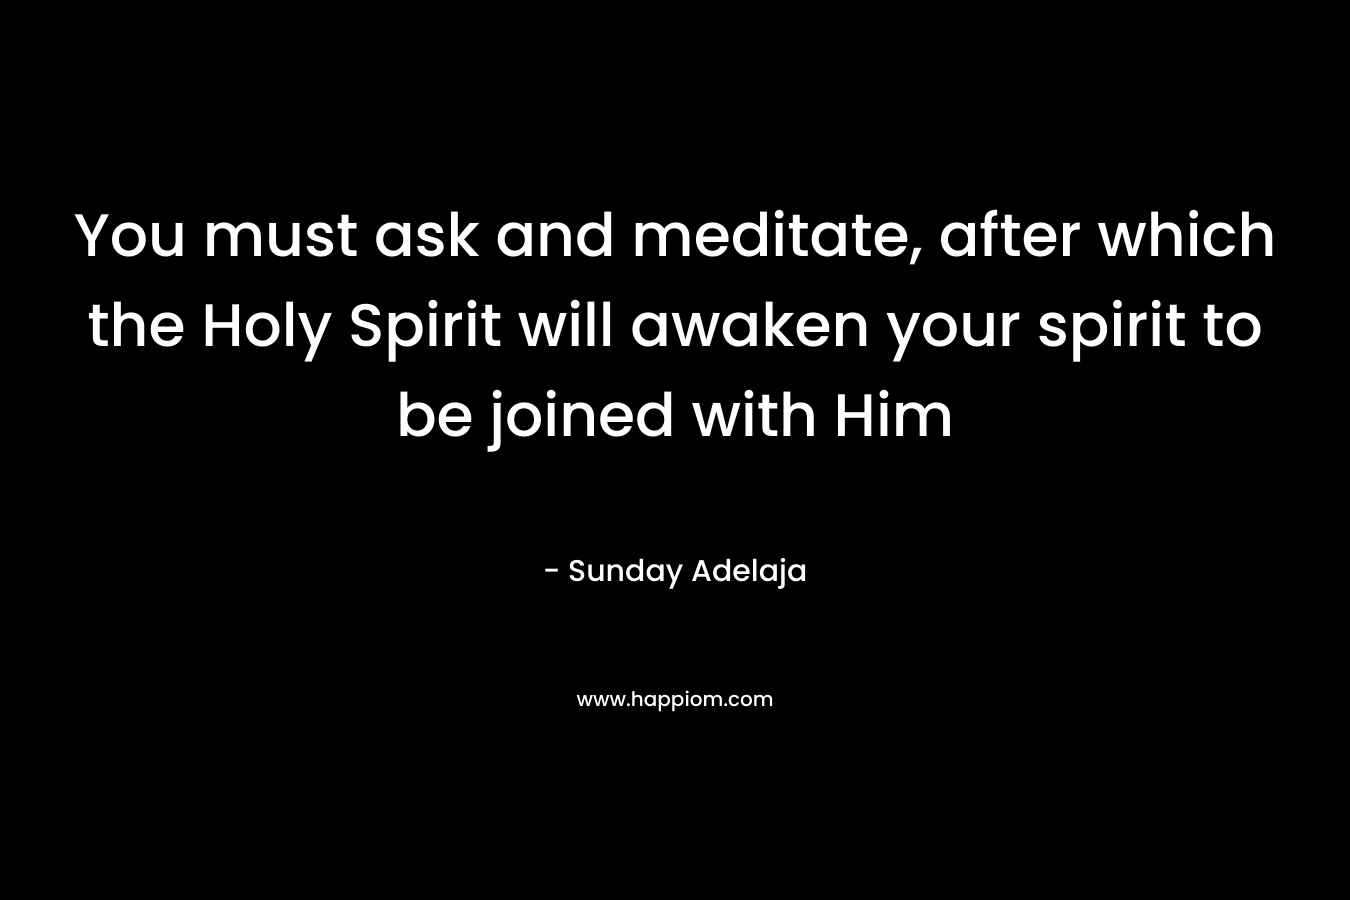 You must ask and meditate, after which the Holy Spirit will awaken your spirit to be joined with Him